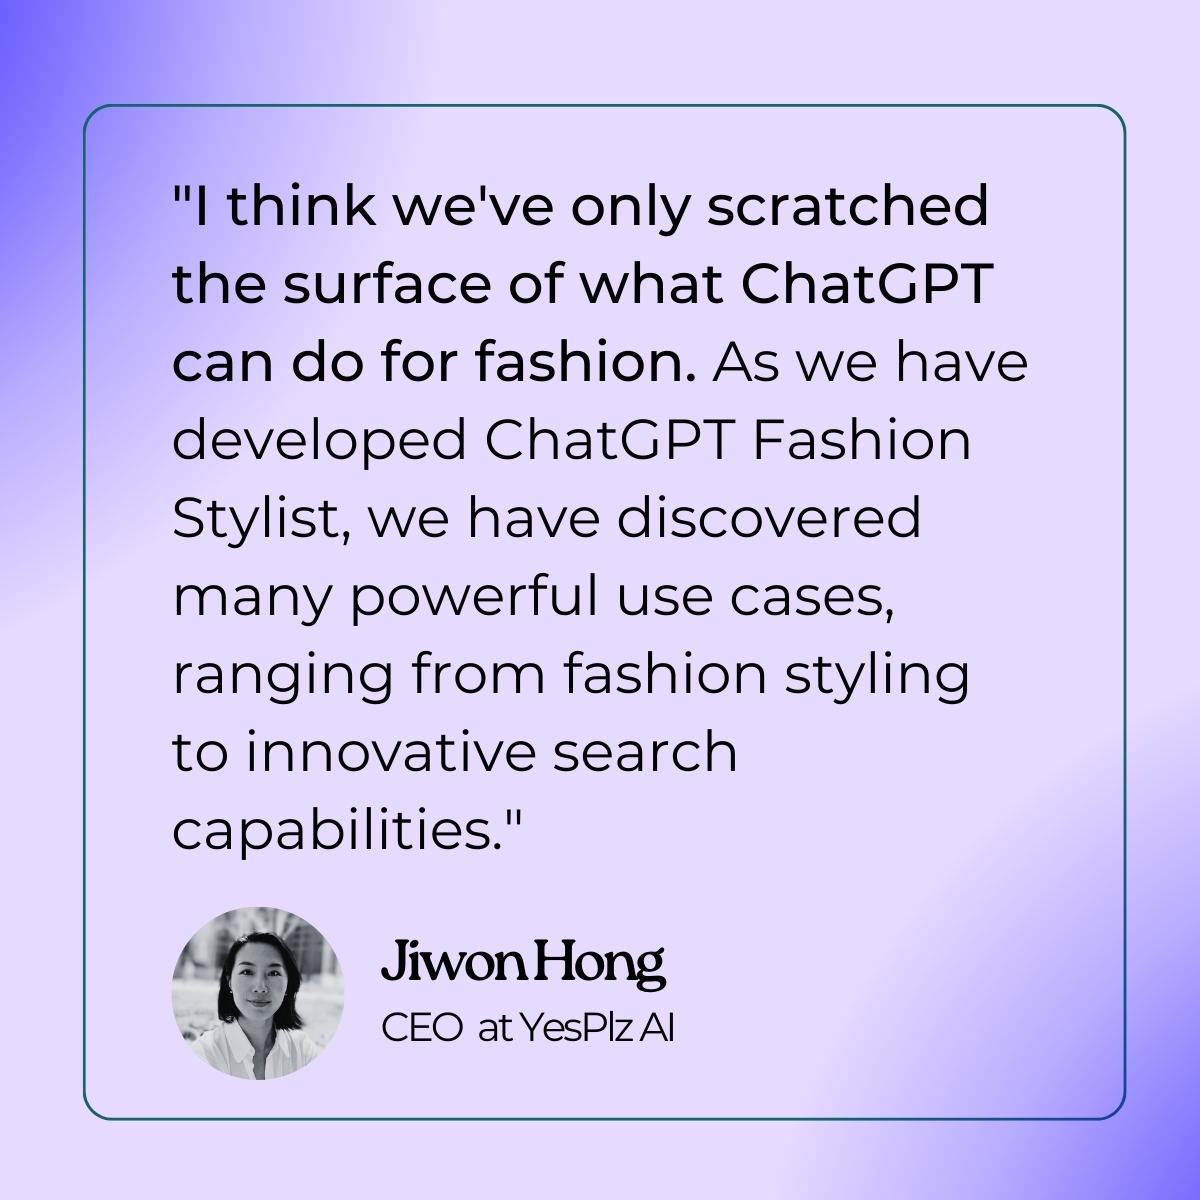 Quote from YesPlz AI CEO Jiwon Hong on ChatGPT and fashion